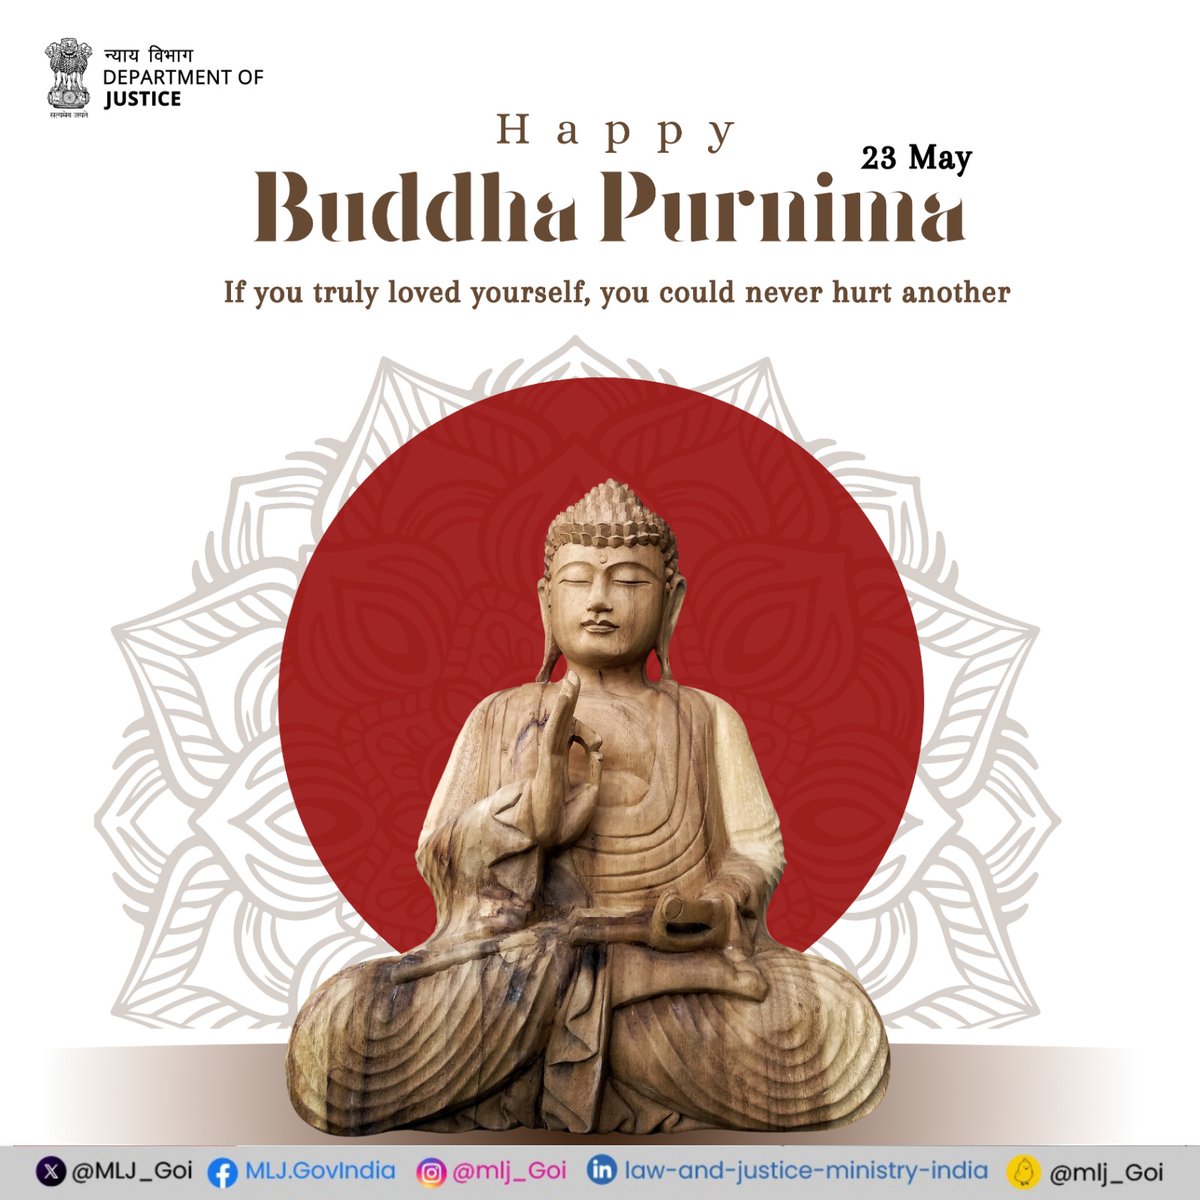 Let’s allow the light of Lord Buddha’s wisdom to guide us on the path of righteousness and harmony. #बुद्धपूर्णिमा #BuddhaPurnima